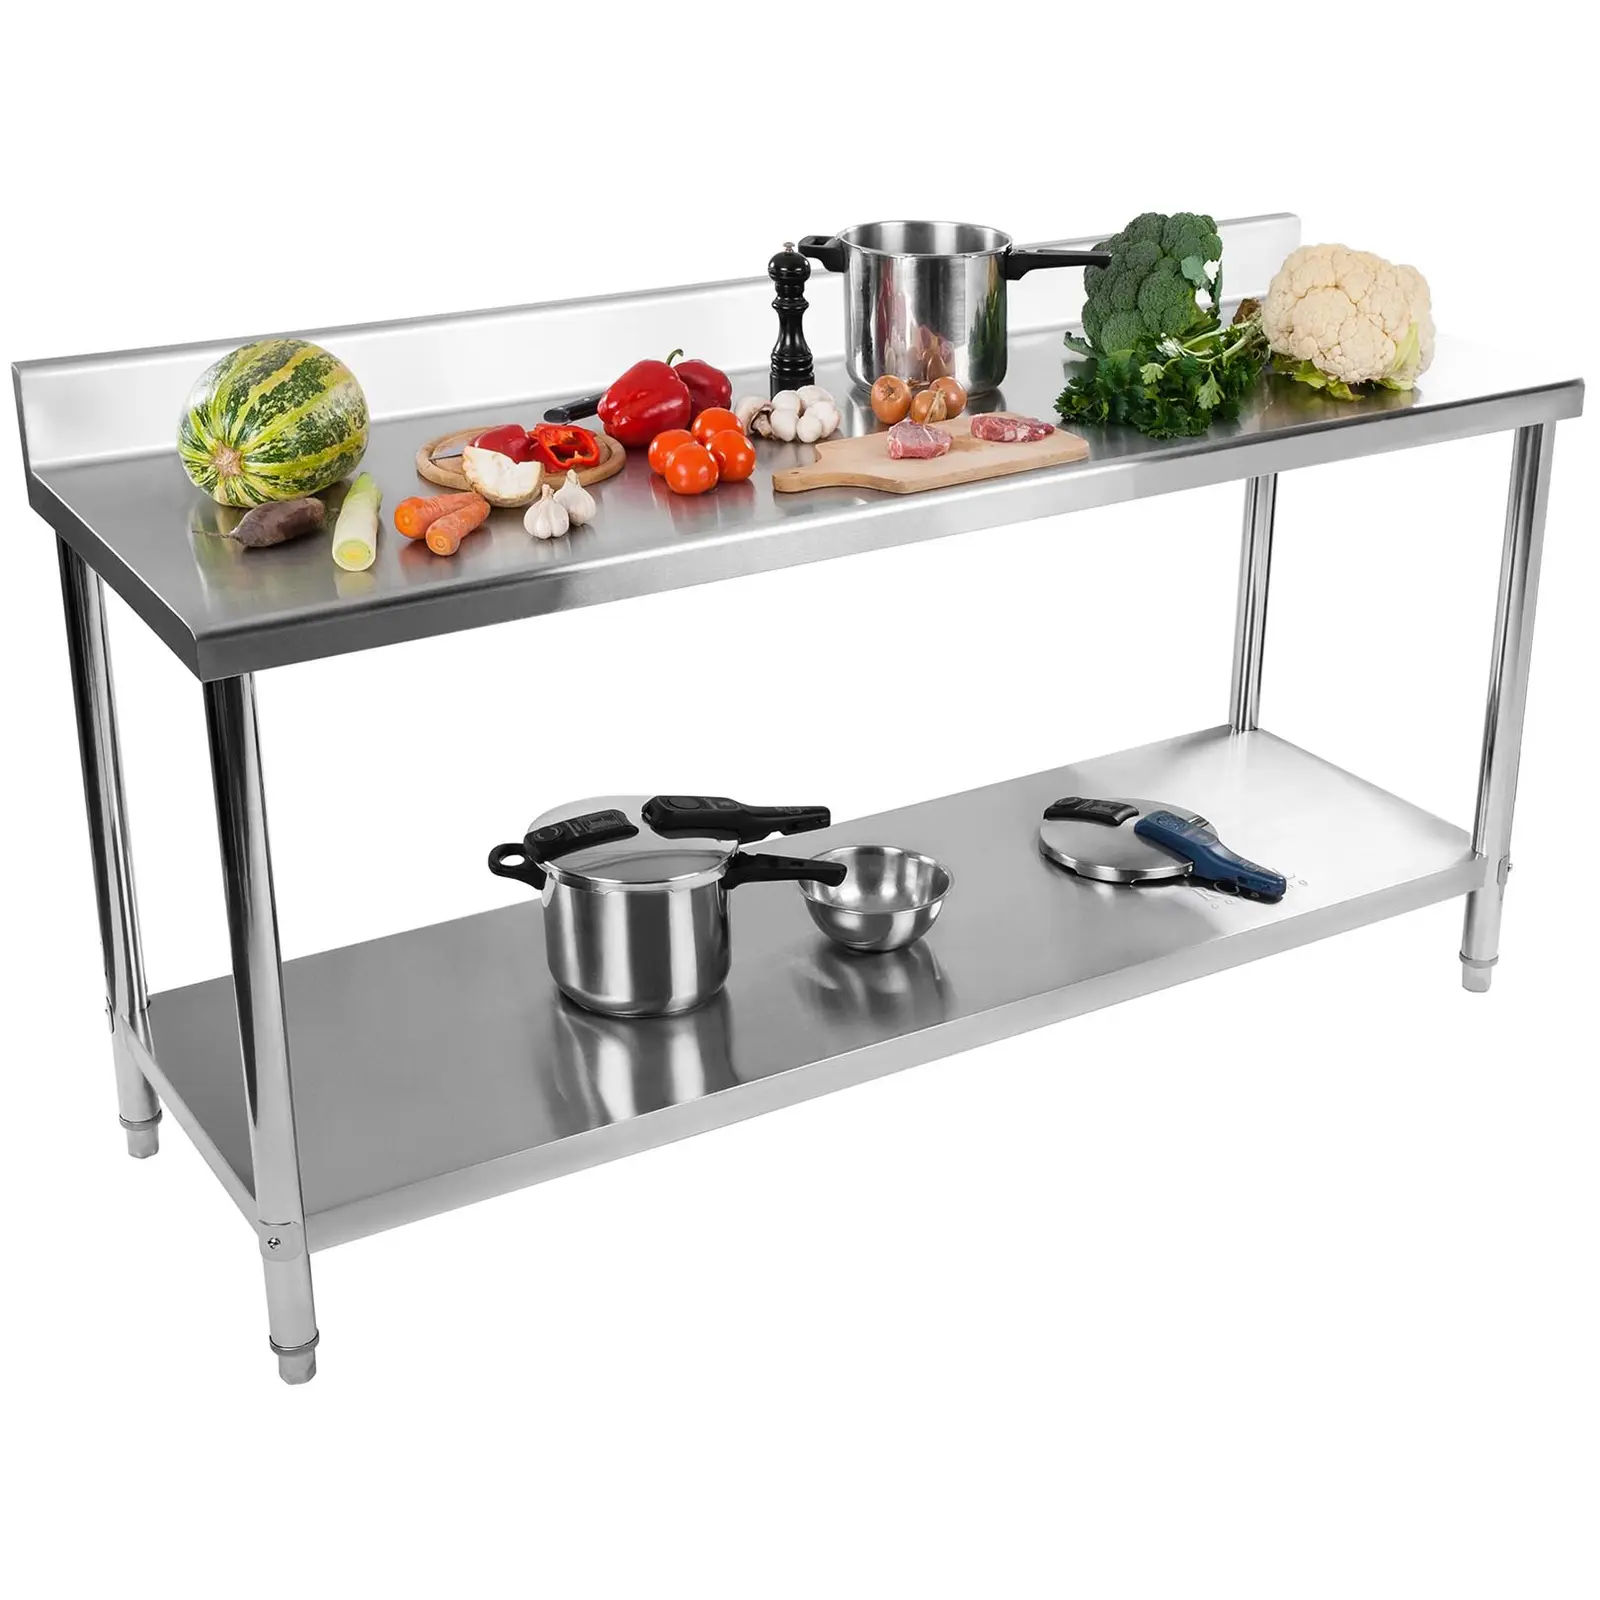 Stainless Steel Table - 180 x 60 cm - upstand - 170 kg weight capacity